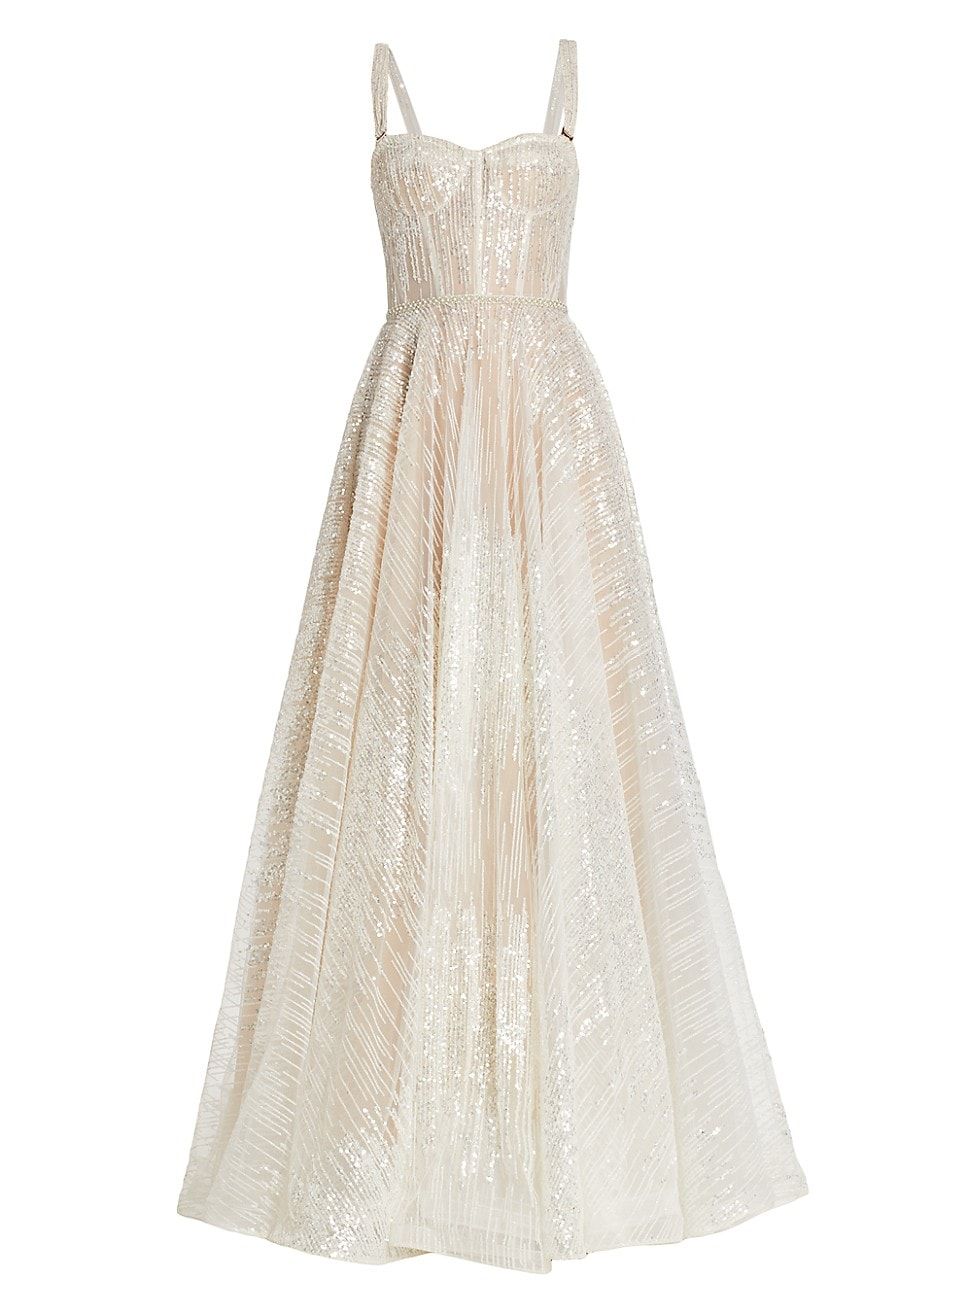 Women's Mademoiselle Bridal Gown - White - Size Large | Saks Fifth Avenue